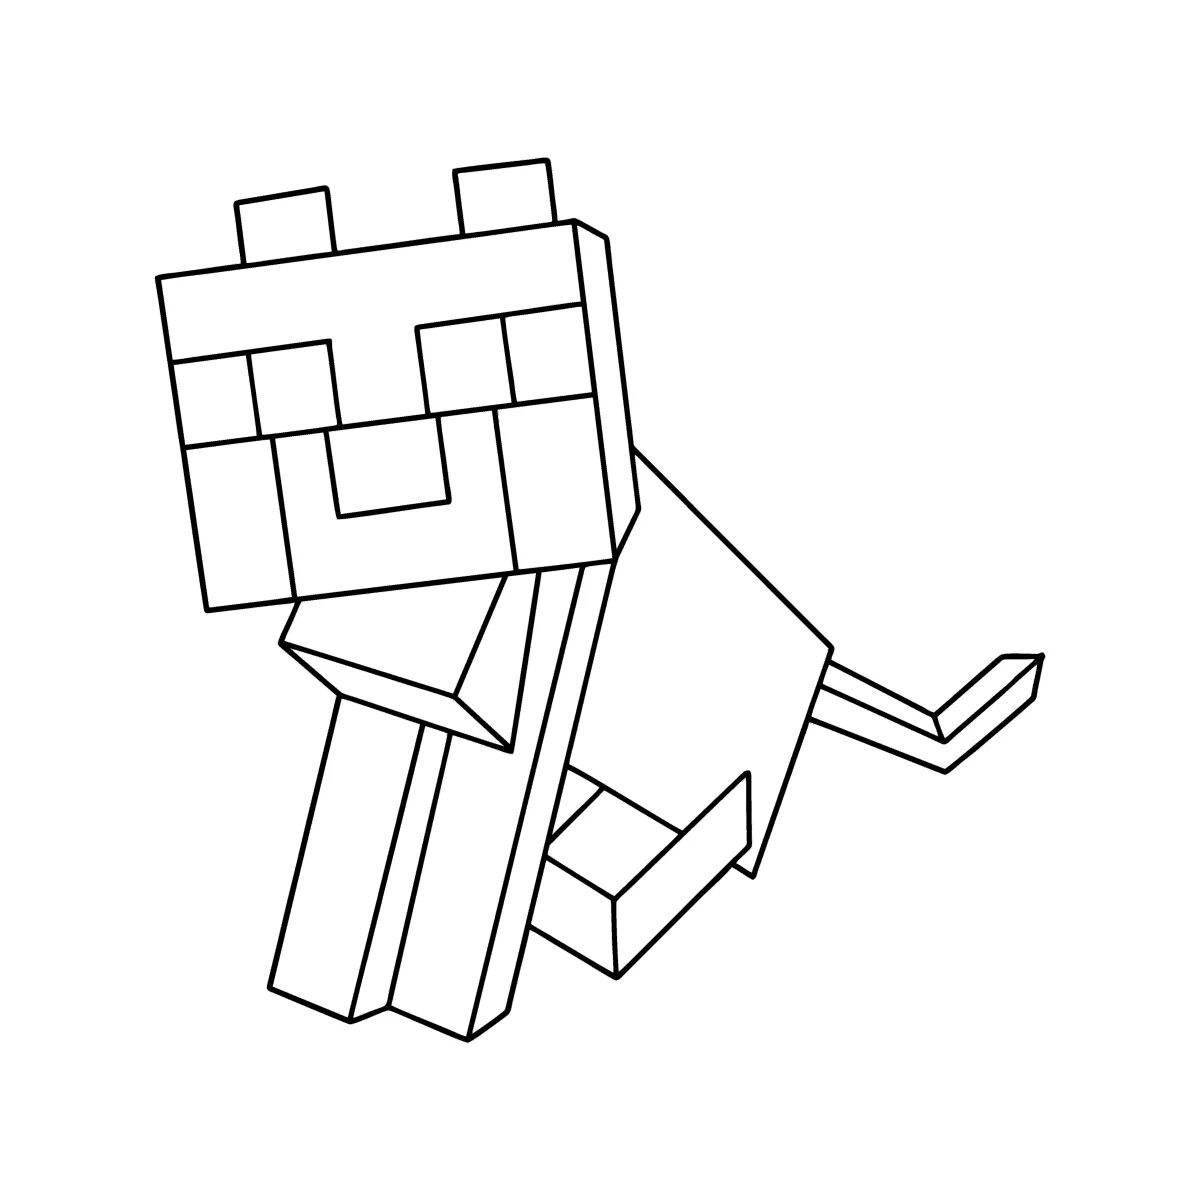 Cute pig minecraft coloring pages